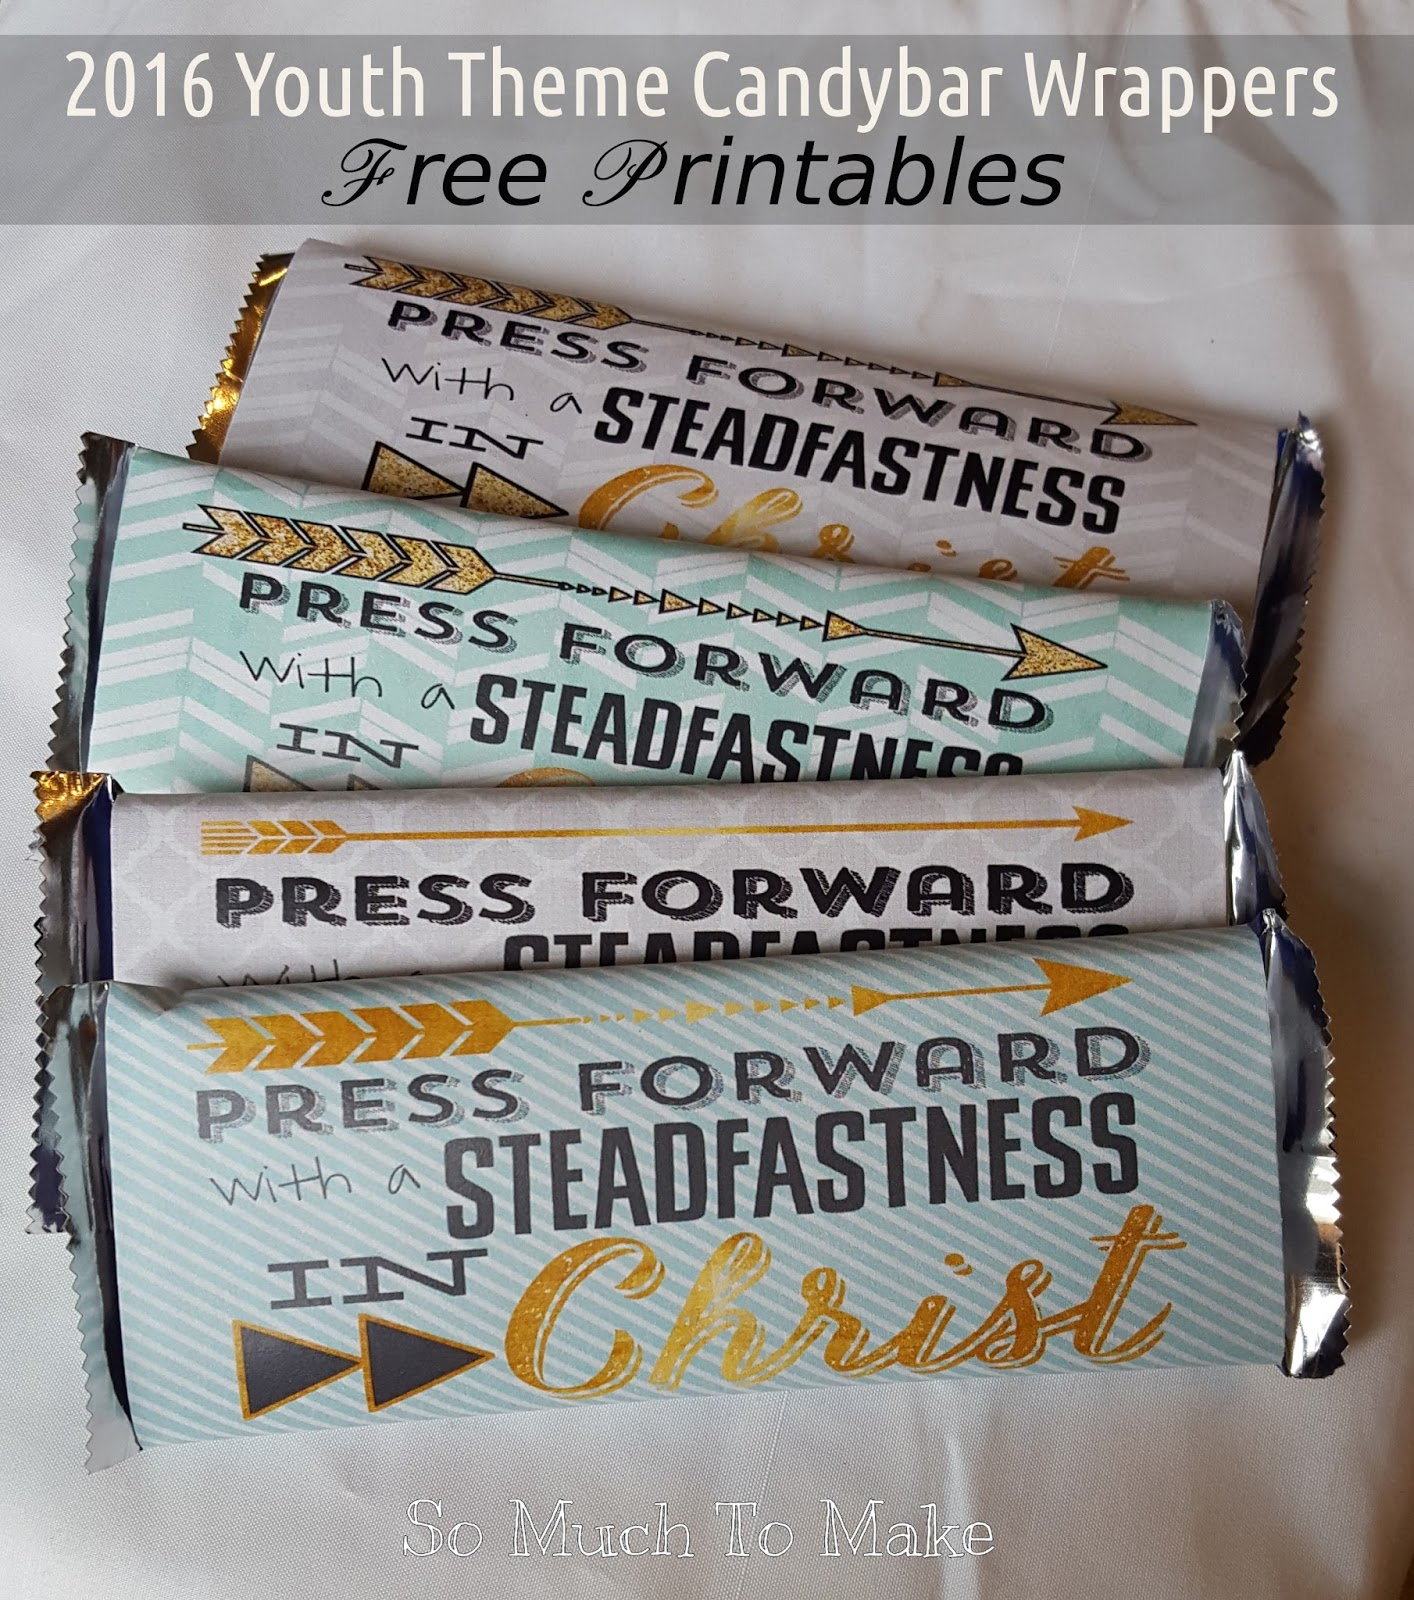 2016 Youth Theme Candybar Wrappers | So Much To Make - Free Printable Birthday Candy Bar Wrappers